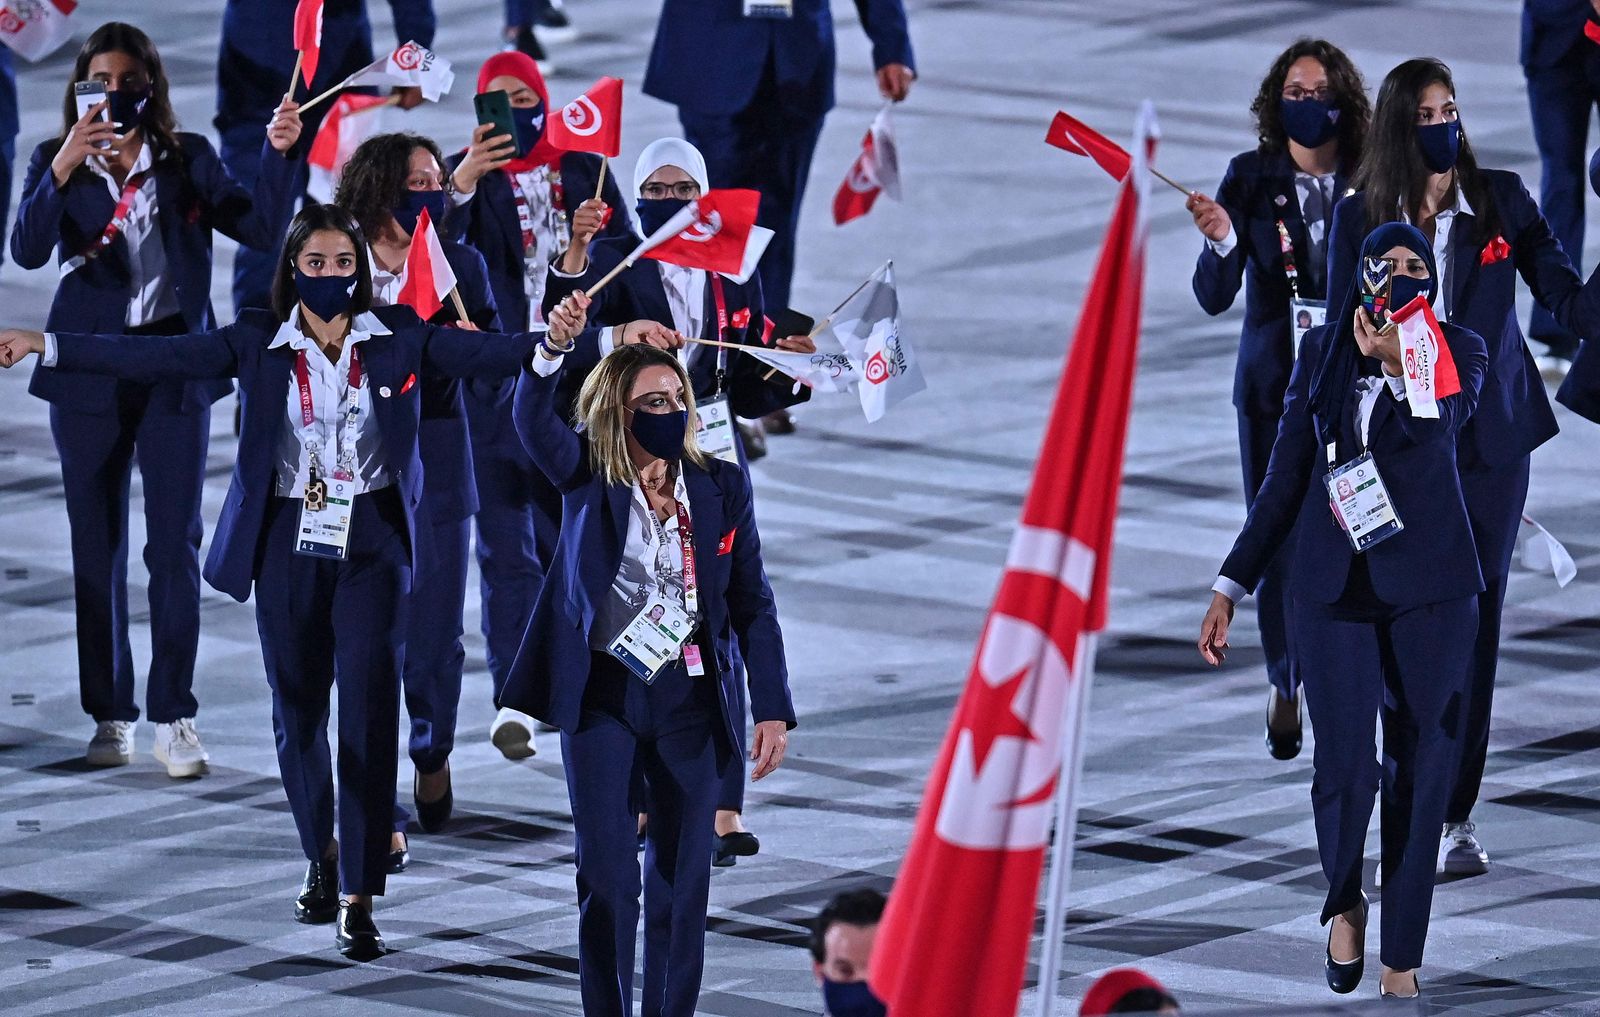 Tunisia's delegation parade during the opening ceremony of the Tokyo 2020 Olympic Games, at the Olympic Stadium, in Tokyo, on July 23, 2021. (Photo by Ben STANSALL / AFP) - AFP